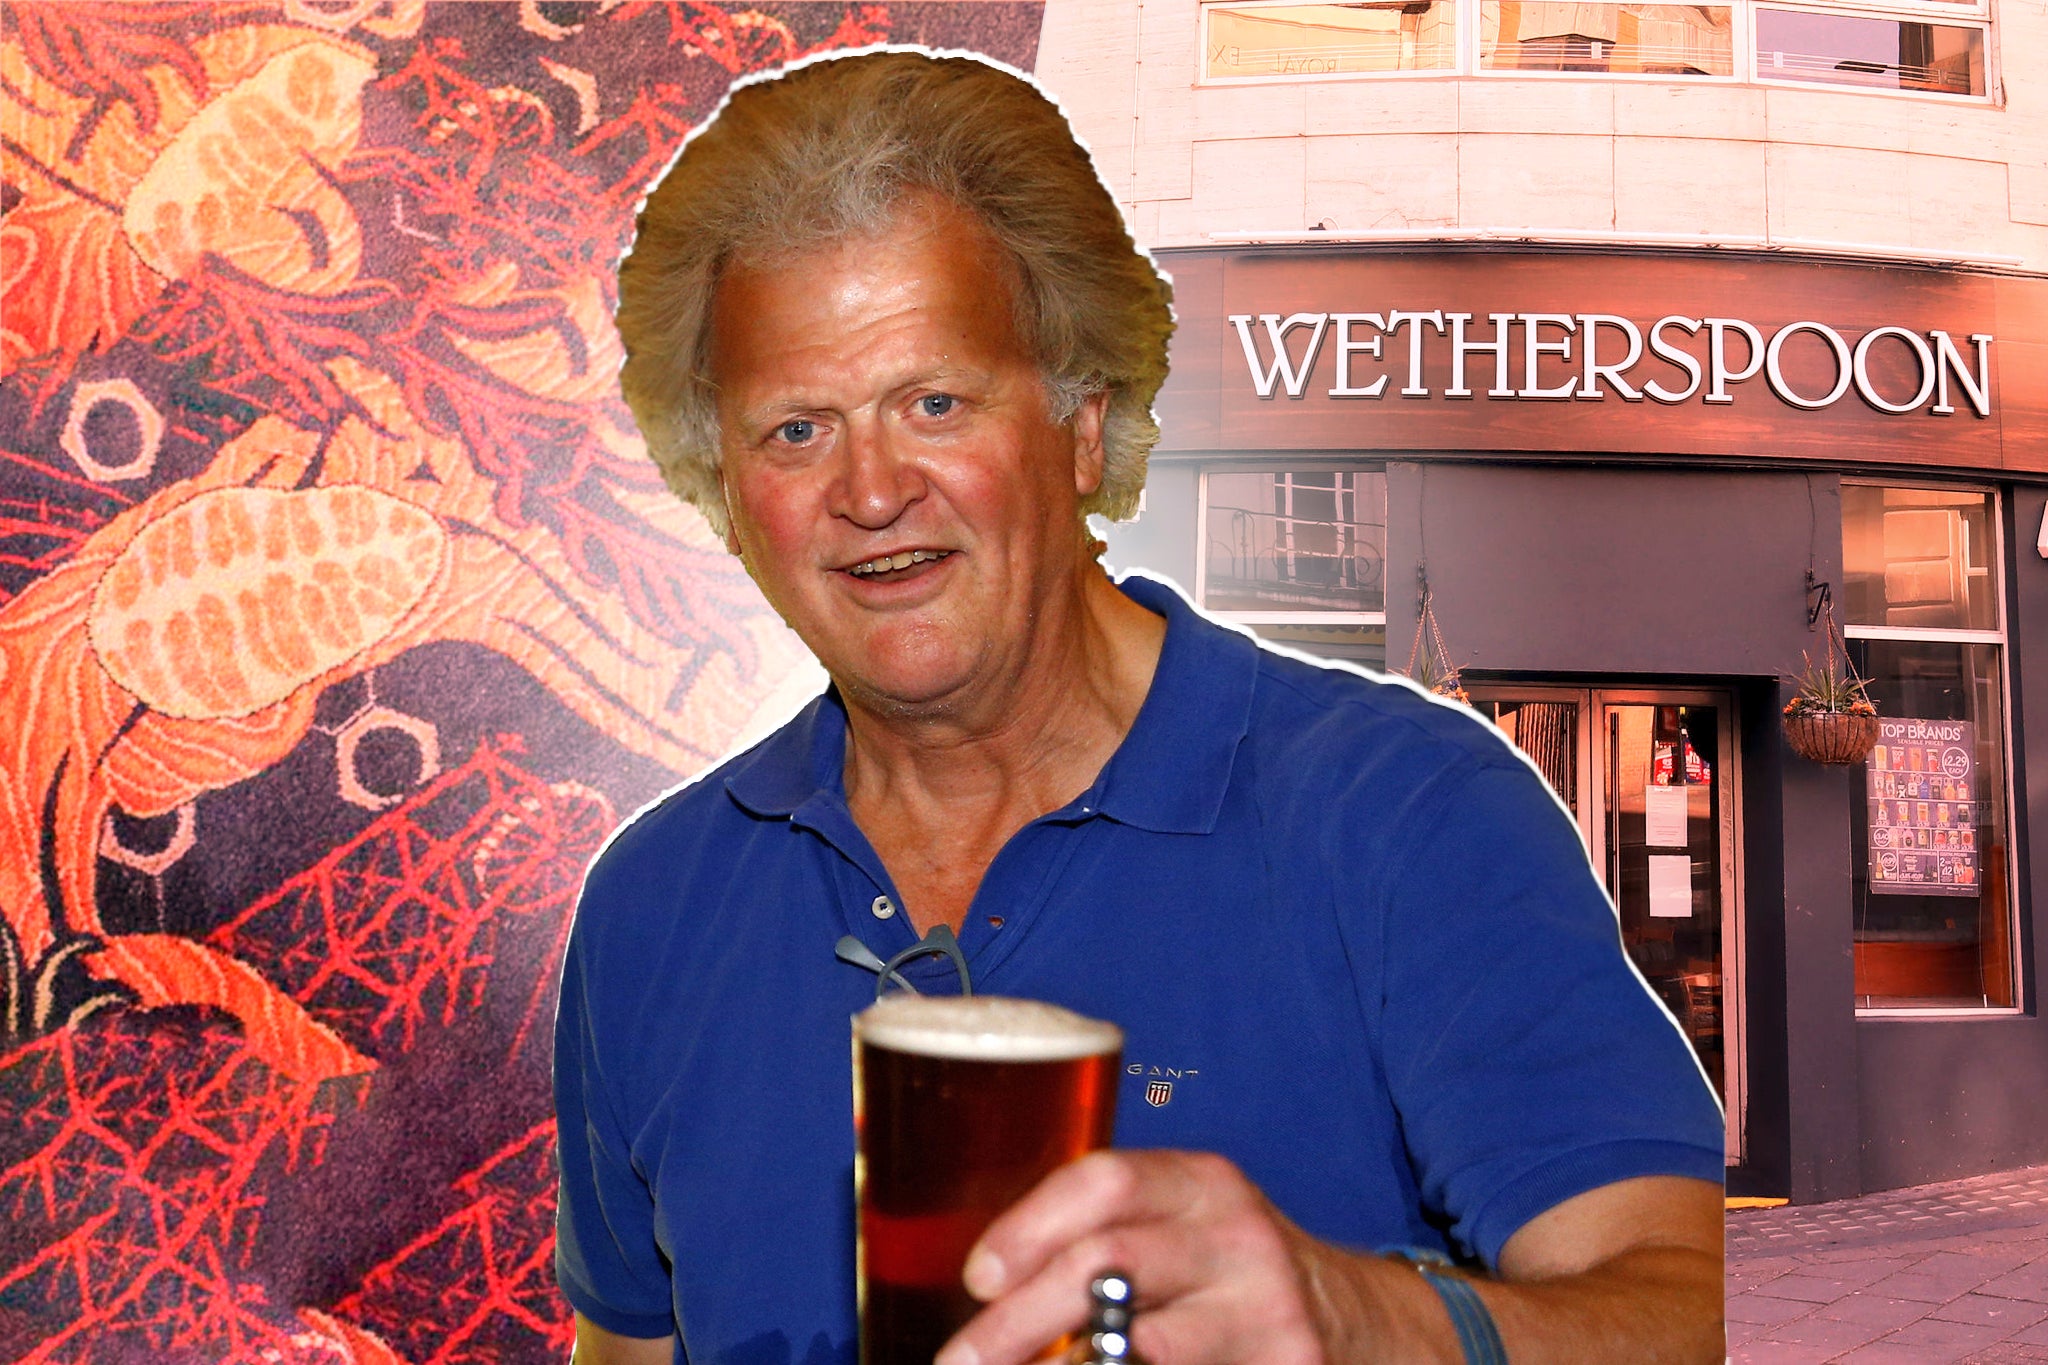 Master of the house: Wetherspoons, and its outspoken owner Tim Martin, are equally loved and loathed across the country